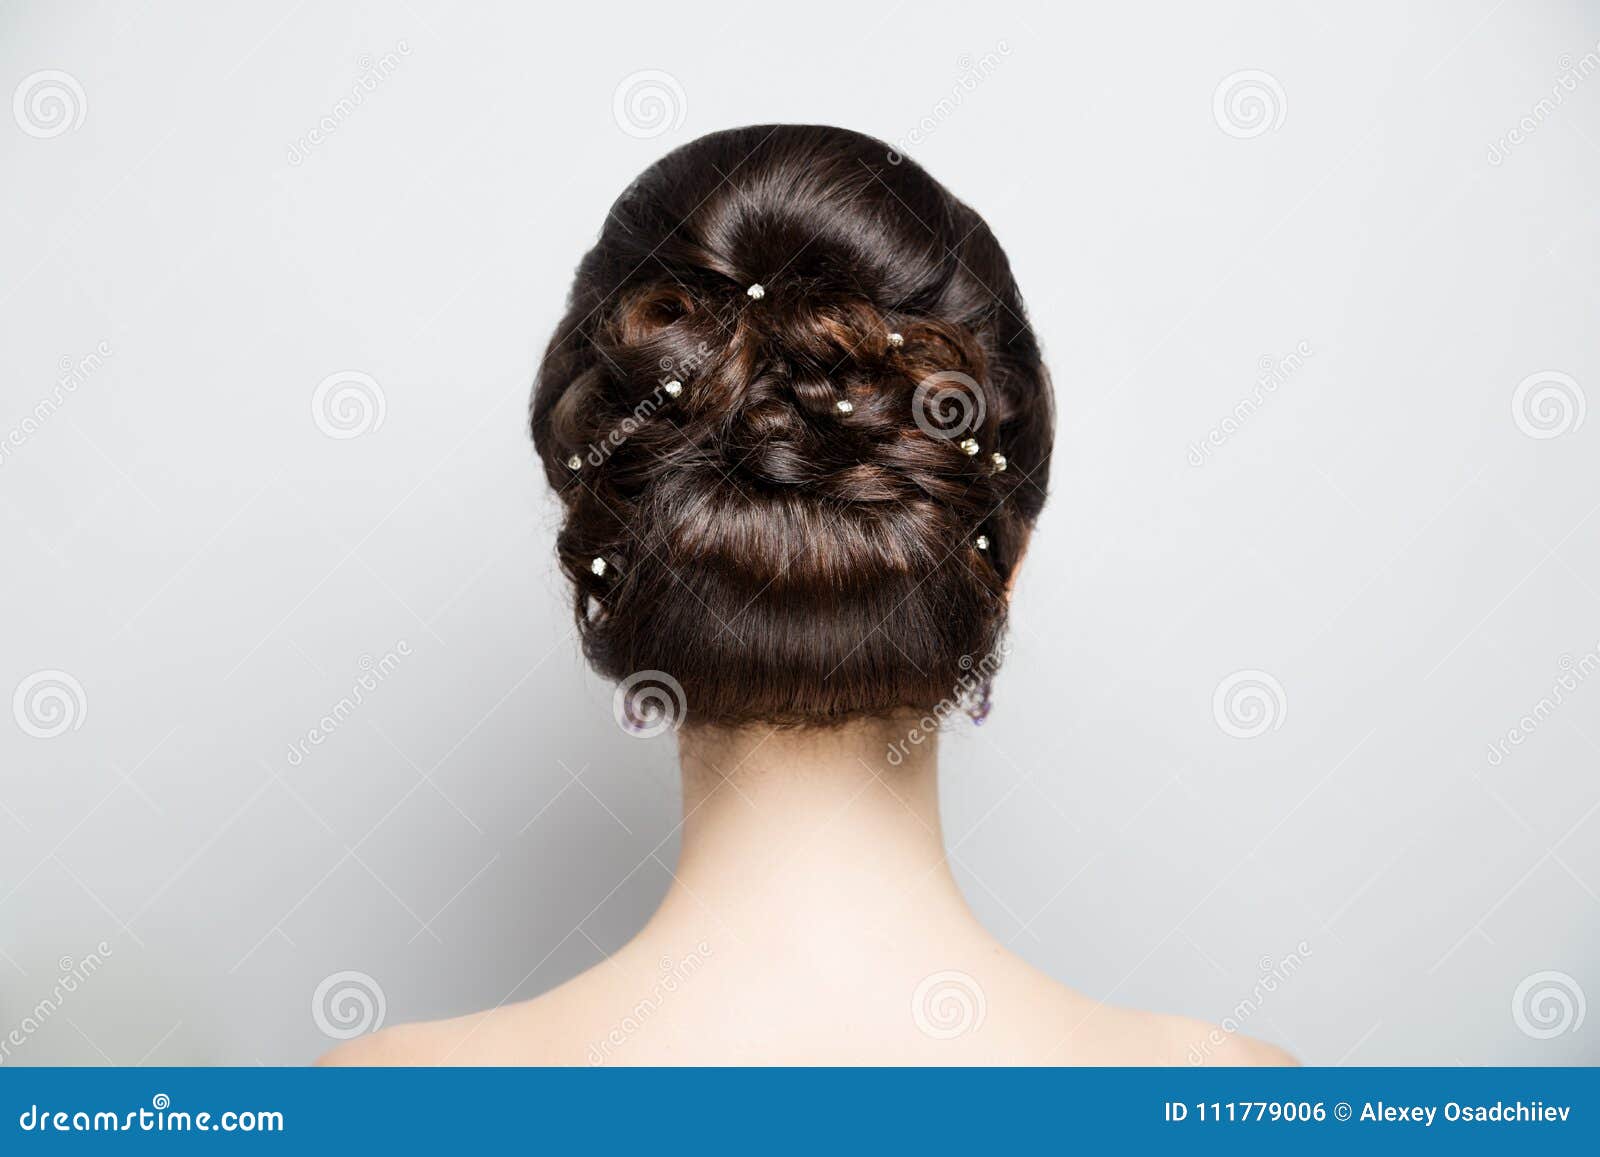 Woman hair style back stock photo. Image of bedroom - 111779006